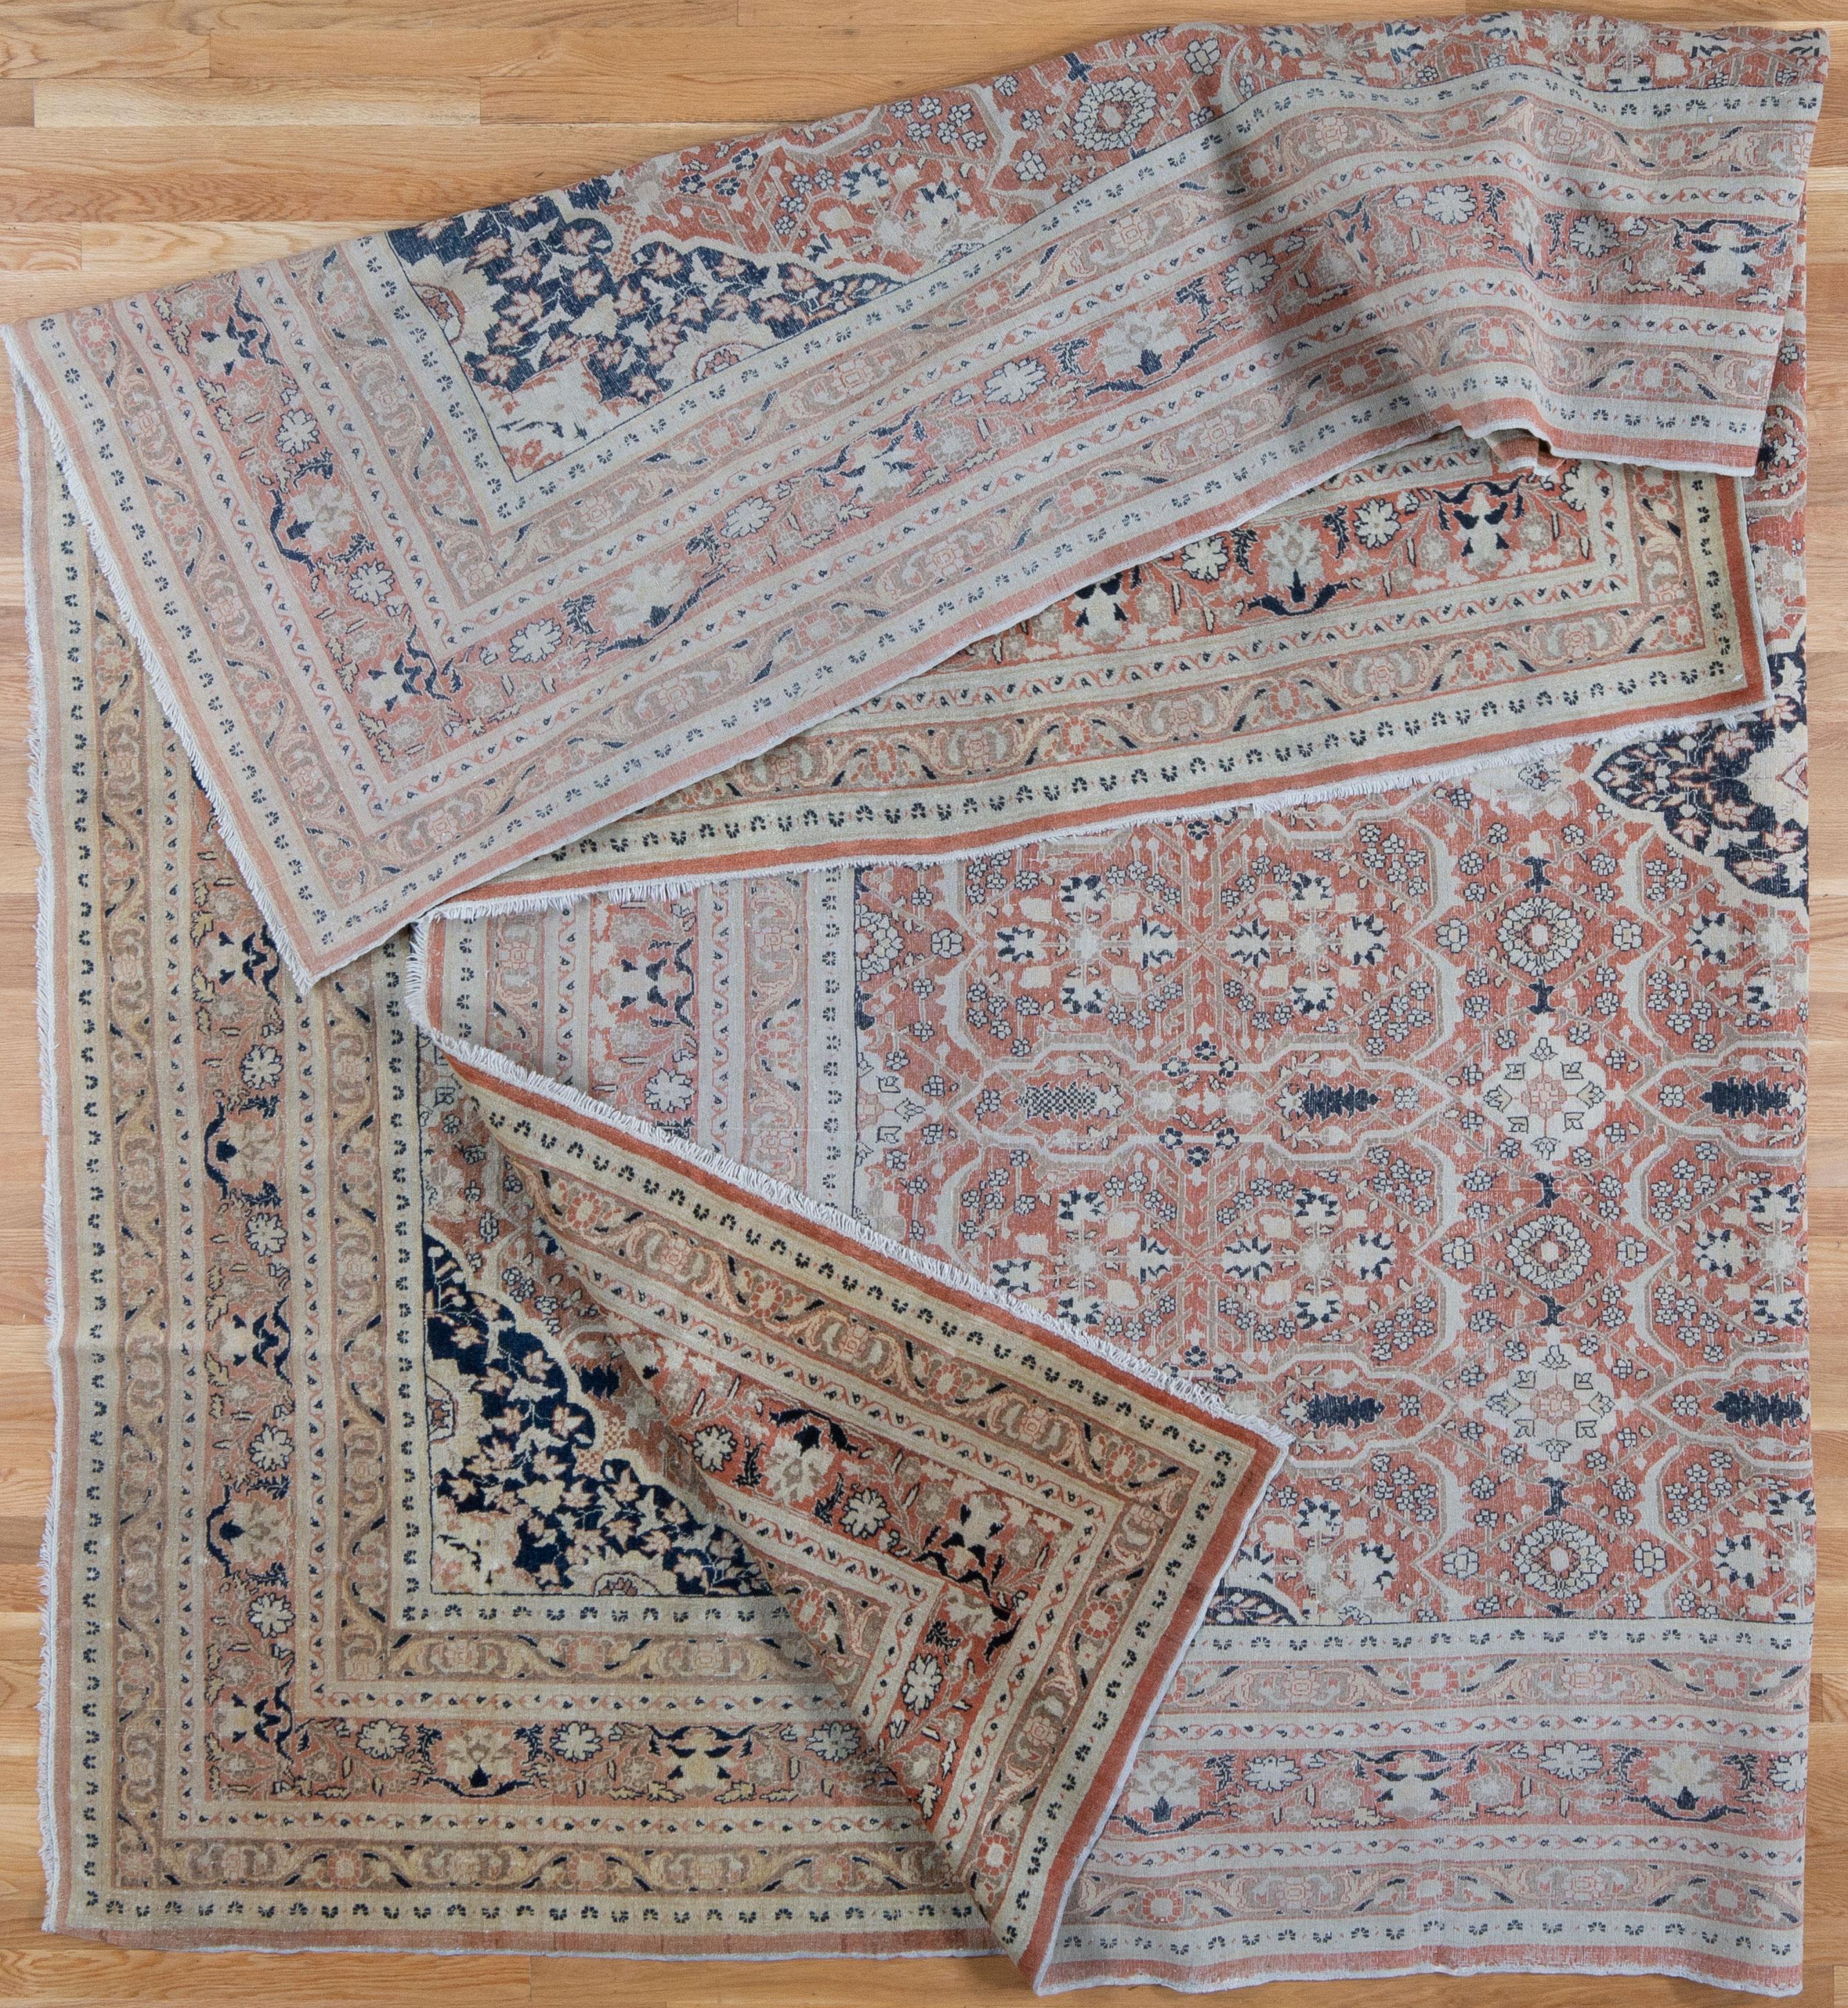 Antique Persian Hadji Jalili Tabriz Blush Pink and Blue Rug, Late 19th Century For Sale 4